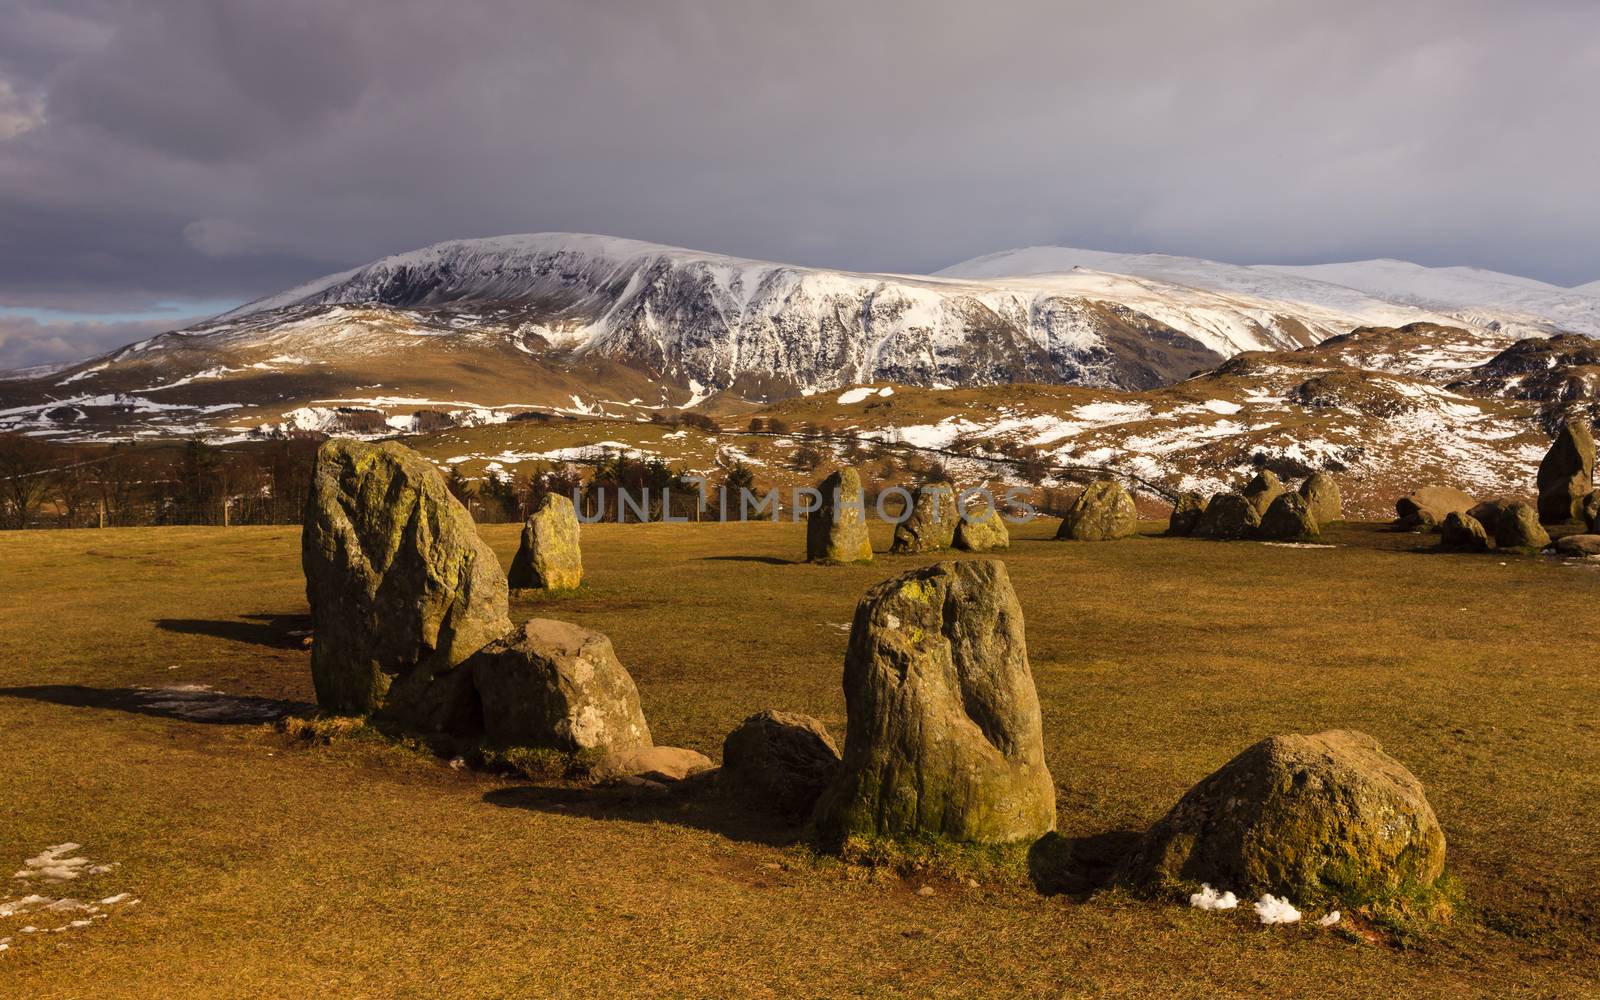 A winter scene at Castlerigg Stone Circle situated near Keswick, Cumbria in the English Lake District national park.